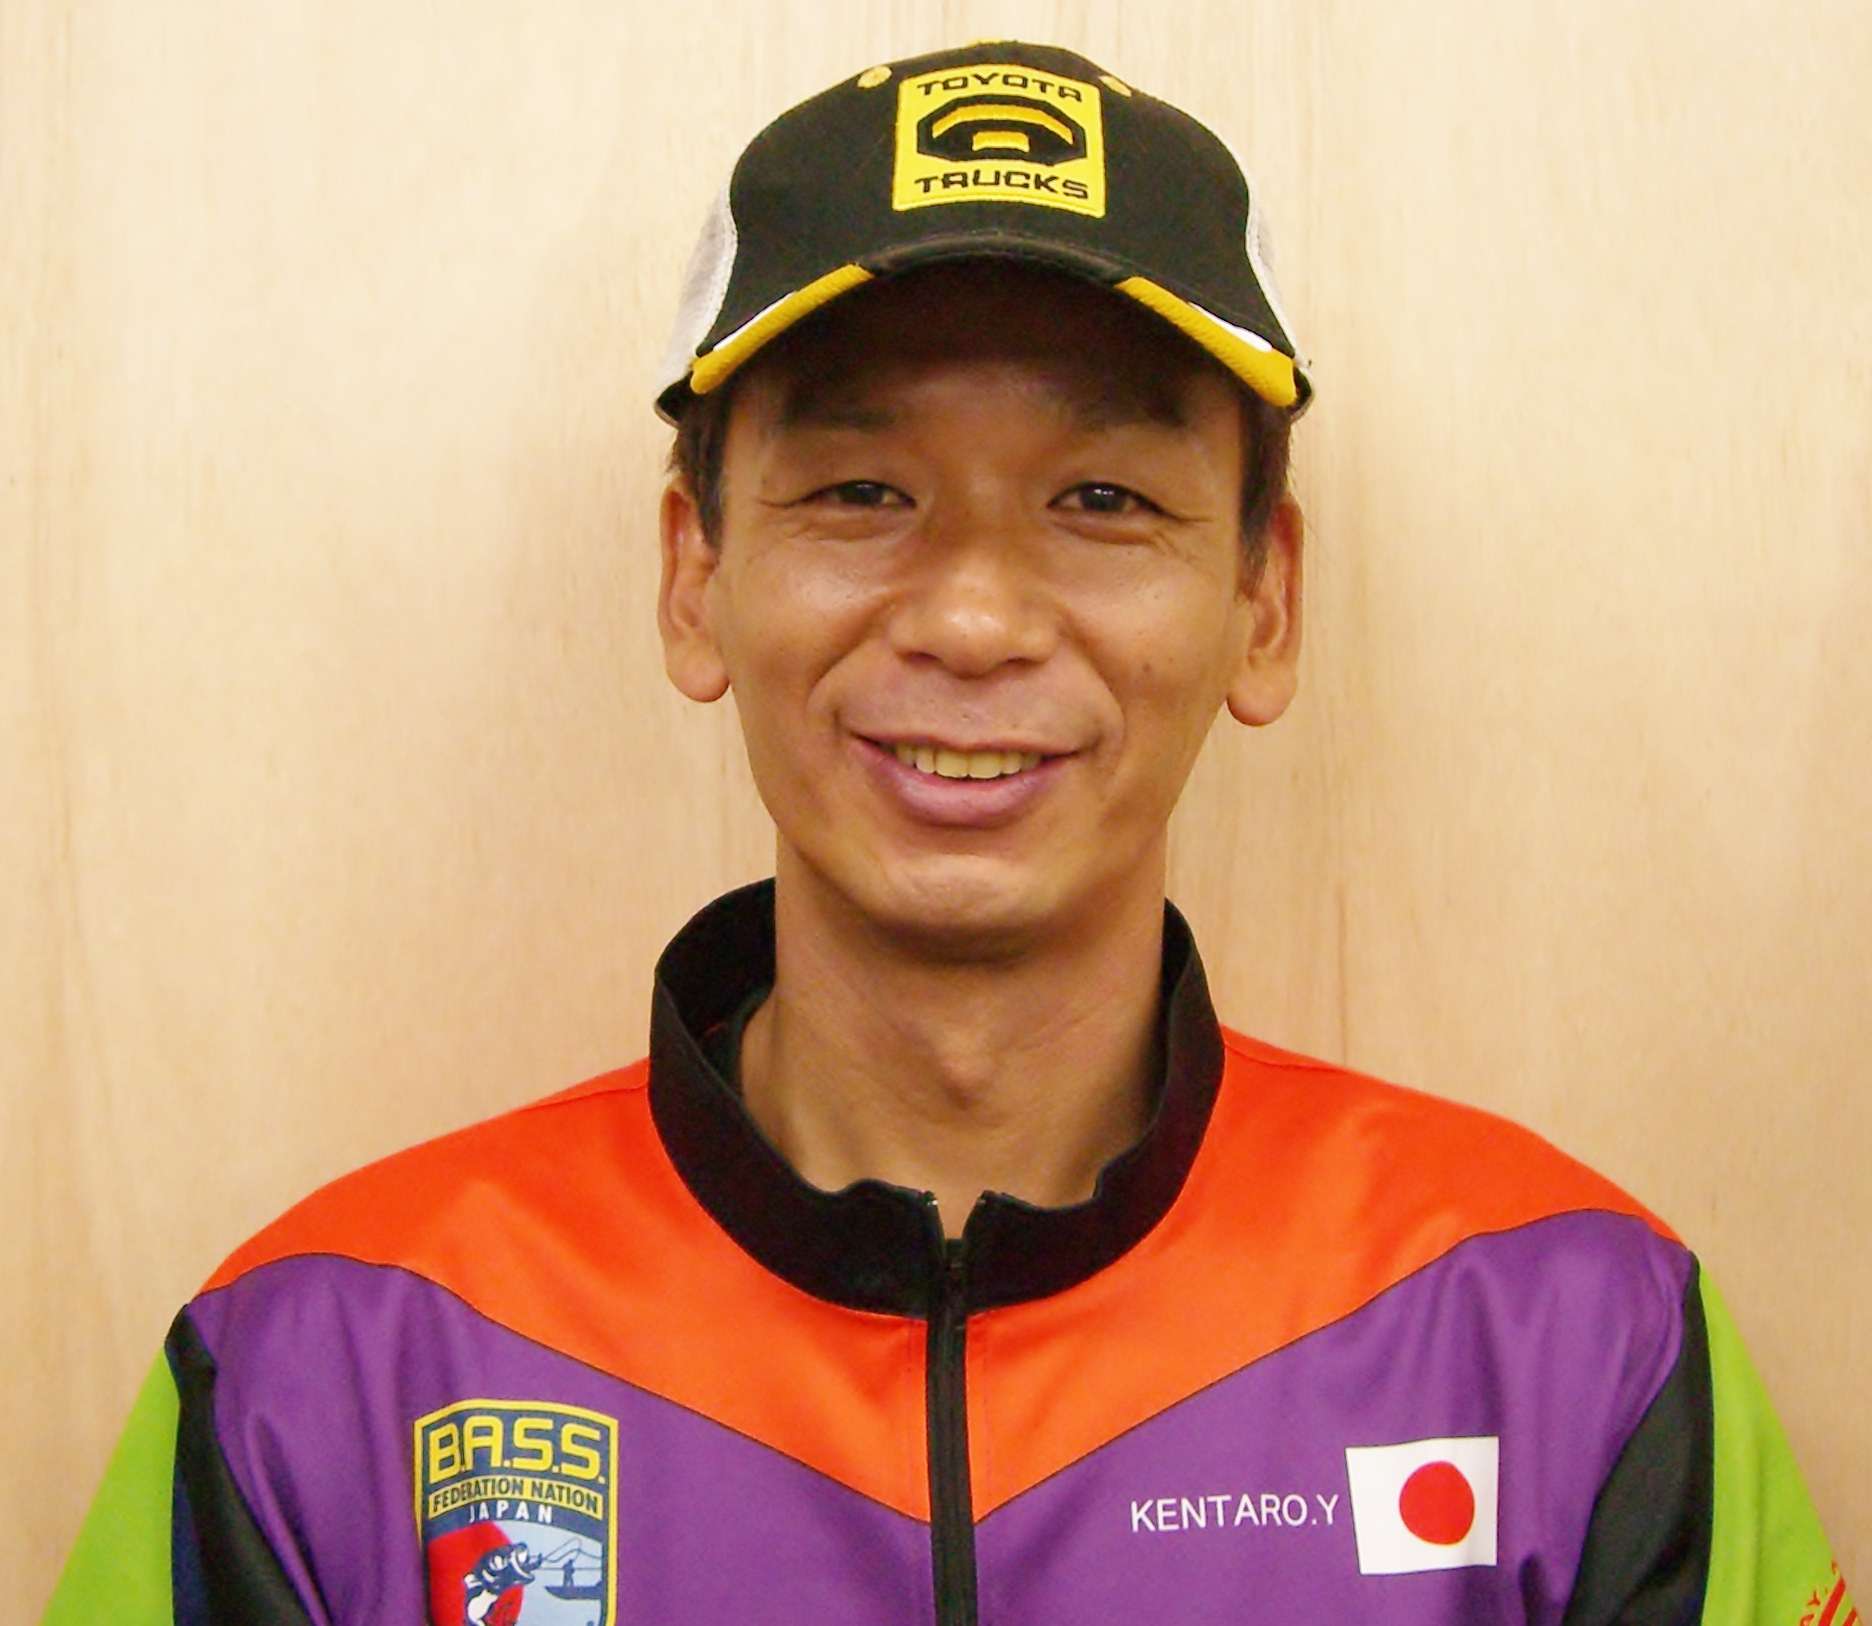 Kentaro Yamada has come all the way from Japan for the championship twice, and now he's coming a third time. He's a member of the Western Bassmasters, and he owns his own business. He loves to go snowboarding.